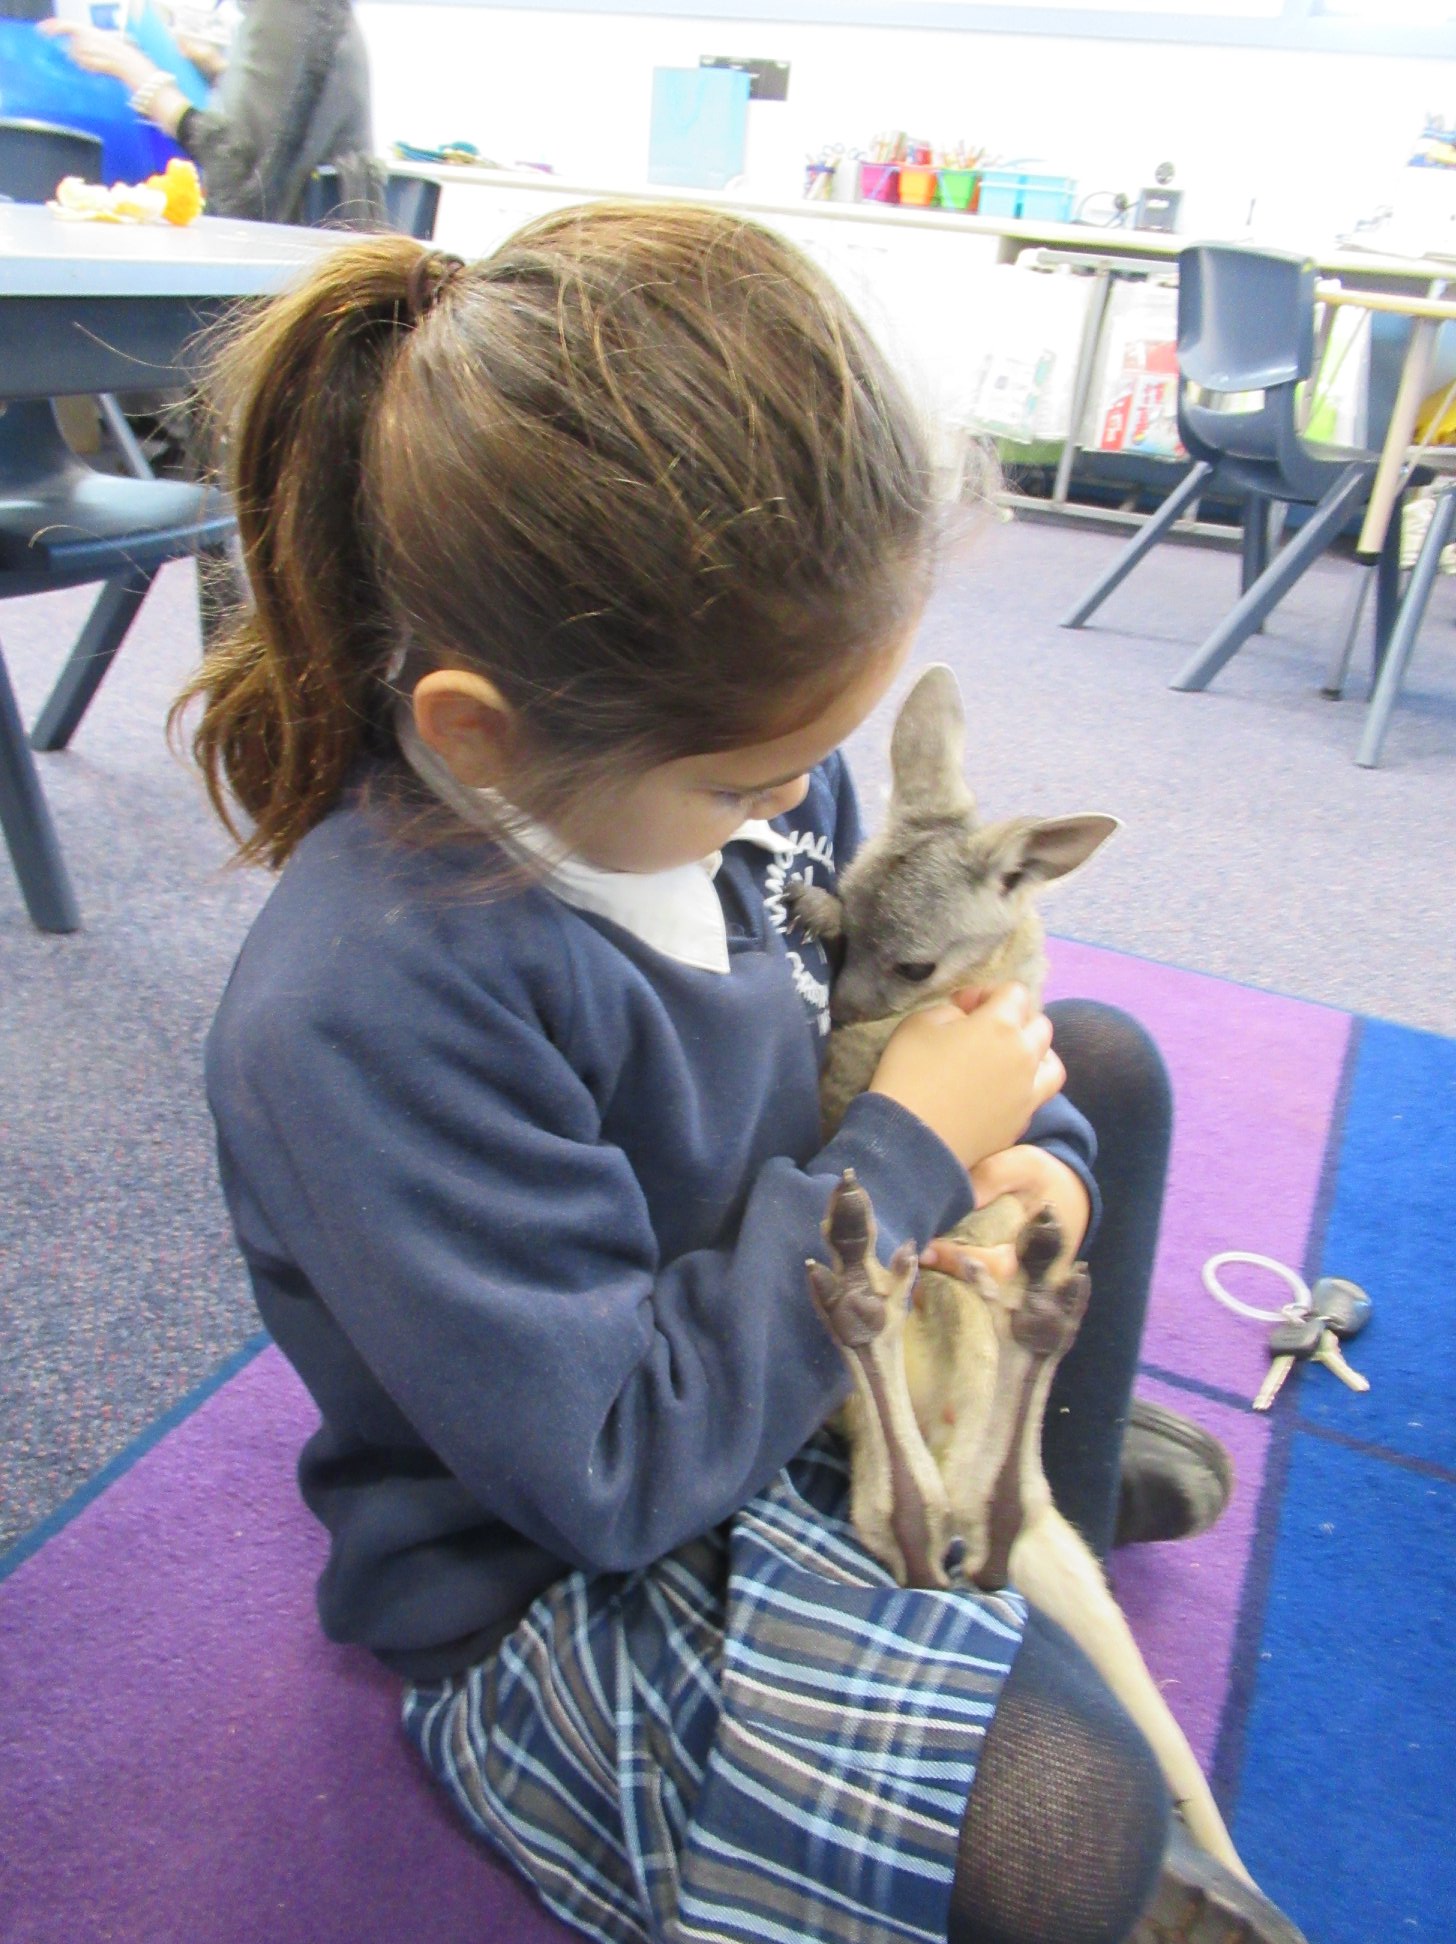 A special visitor hops into Namoi Valley Christian School